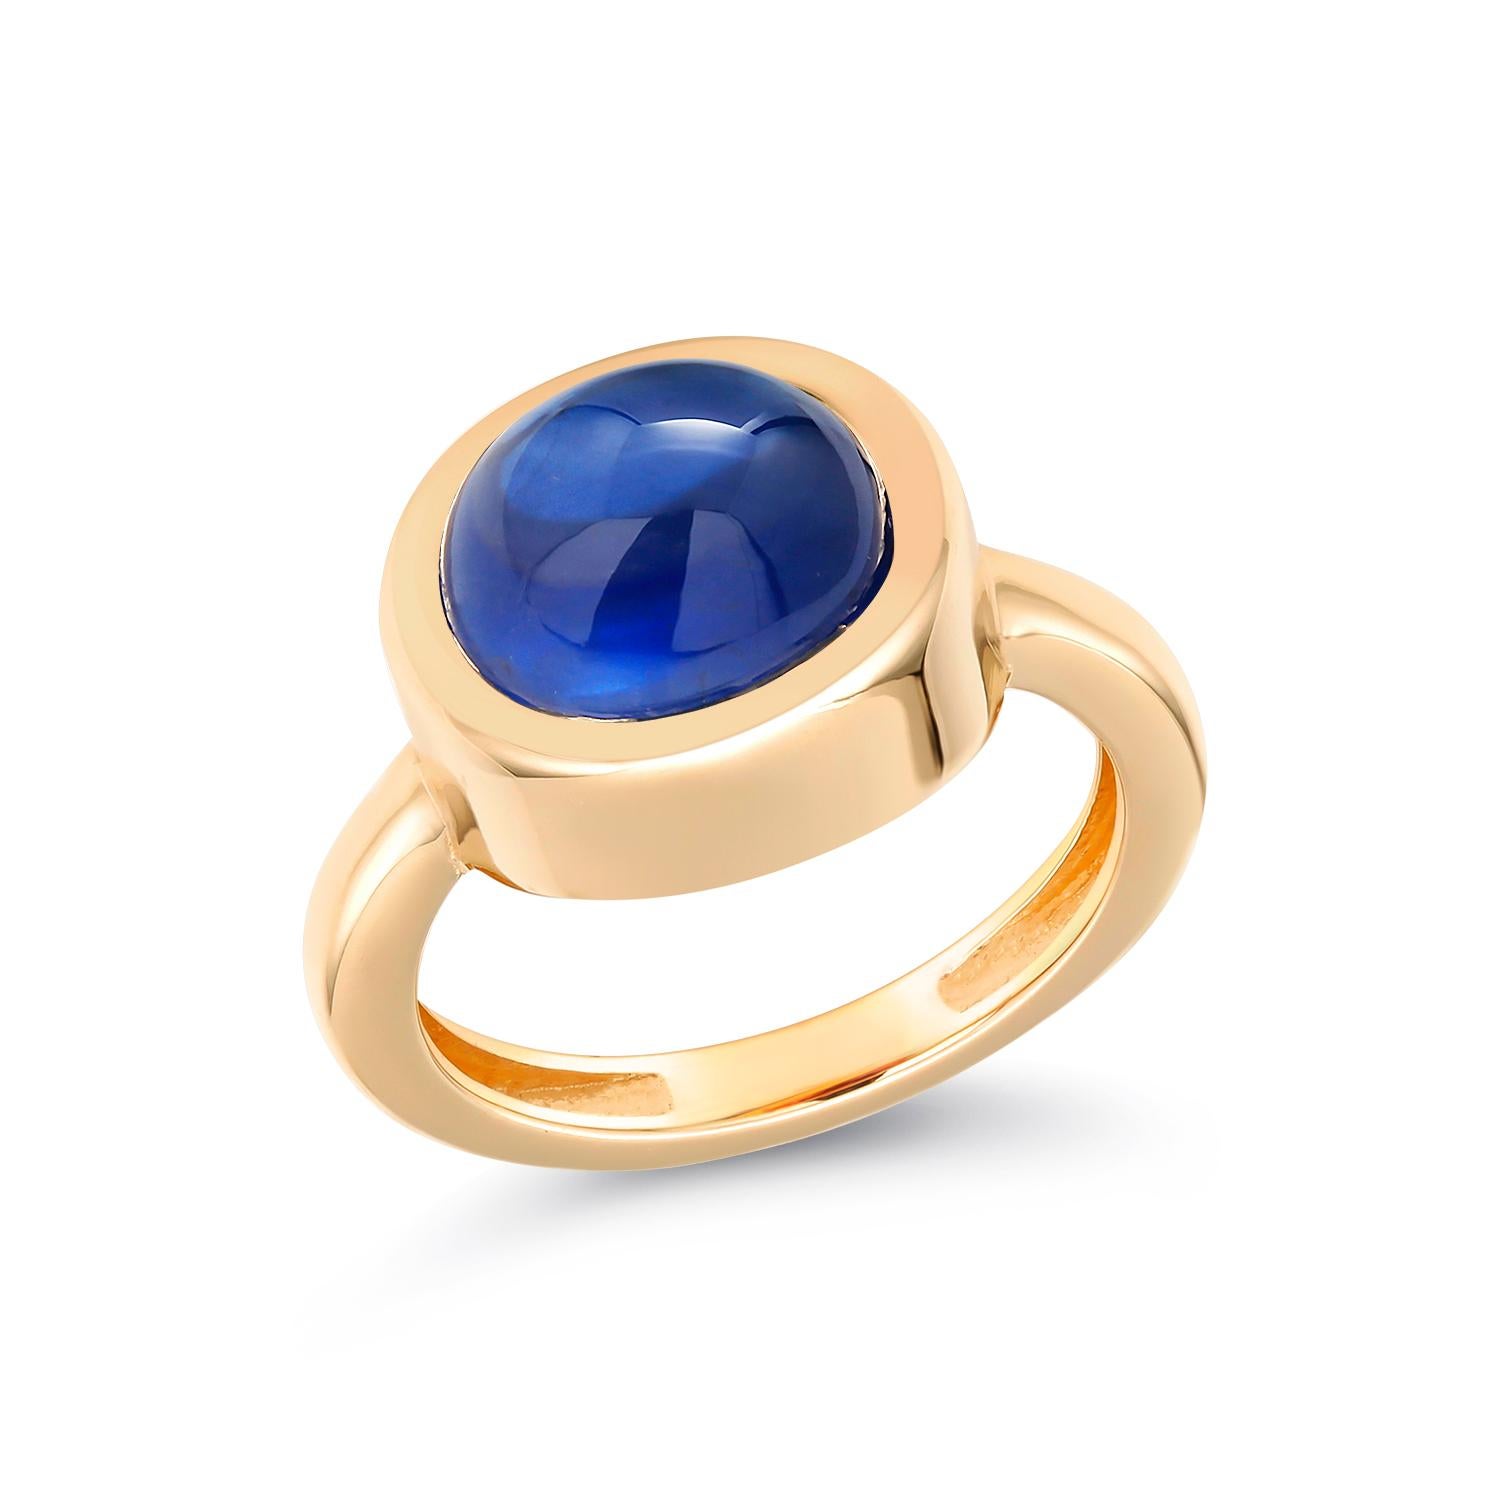 Oval Cut Cabochon Sapphire Raised Dome Yellow Gold Cocktail Ring Weighing 4.40 Carats